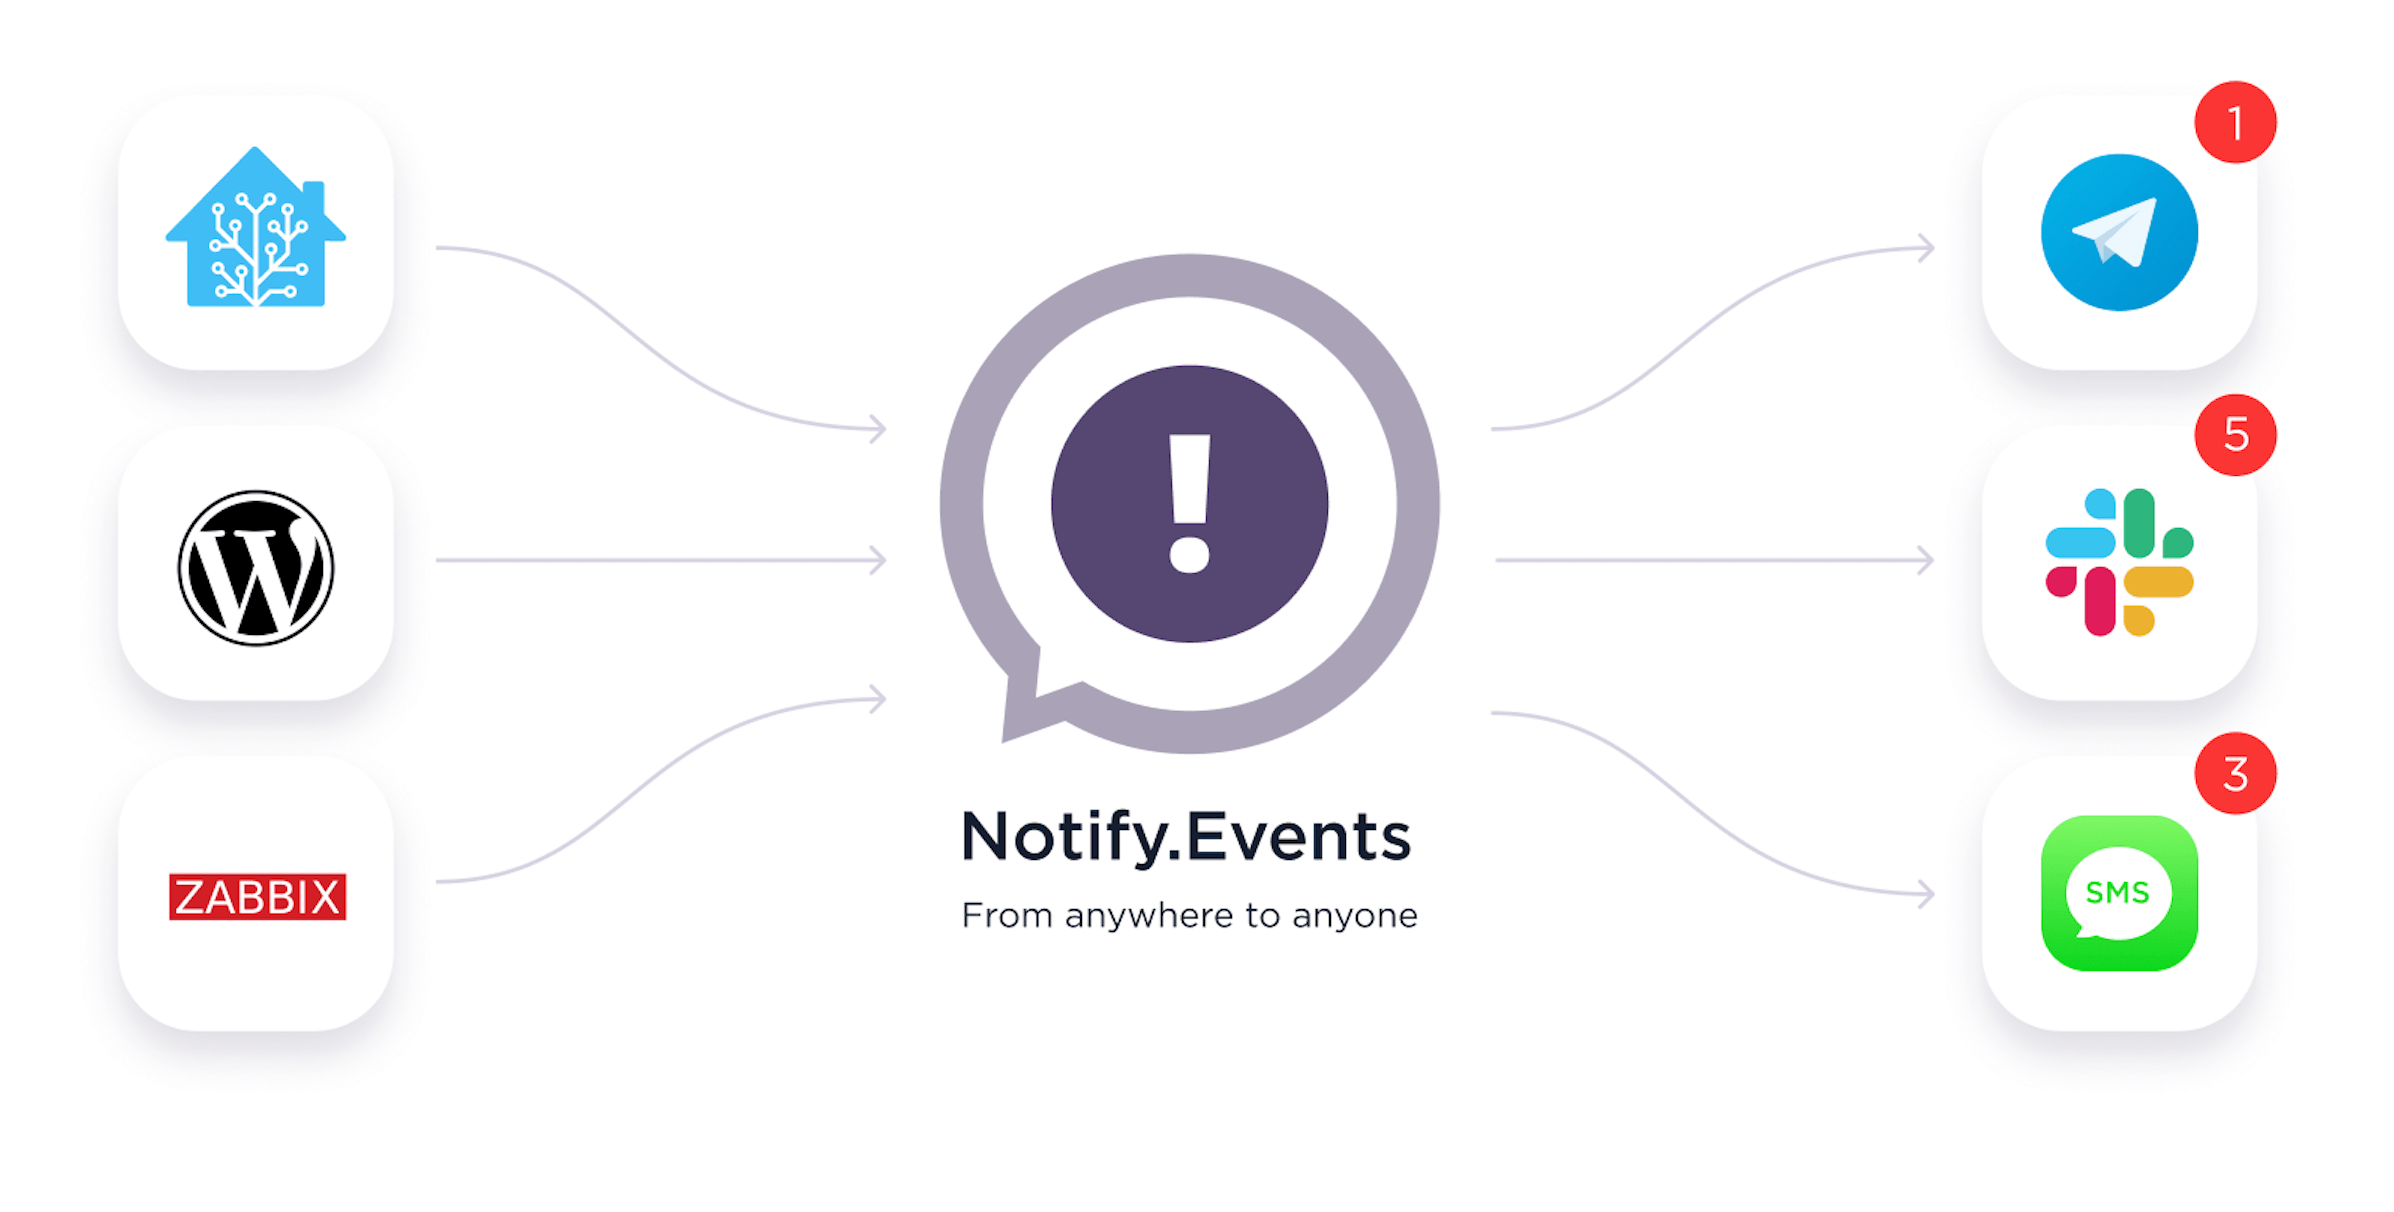 Notify.Events